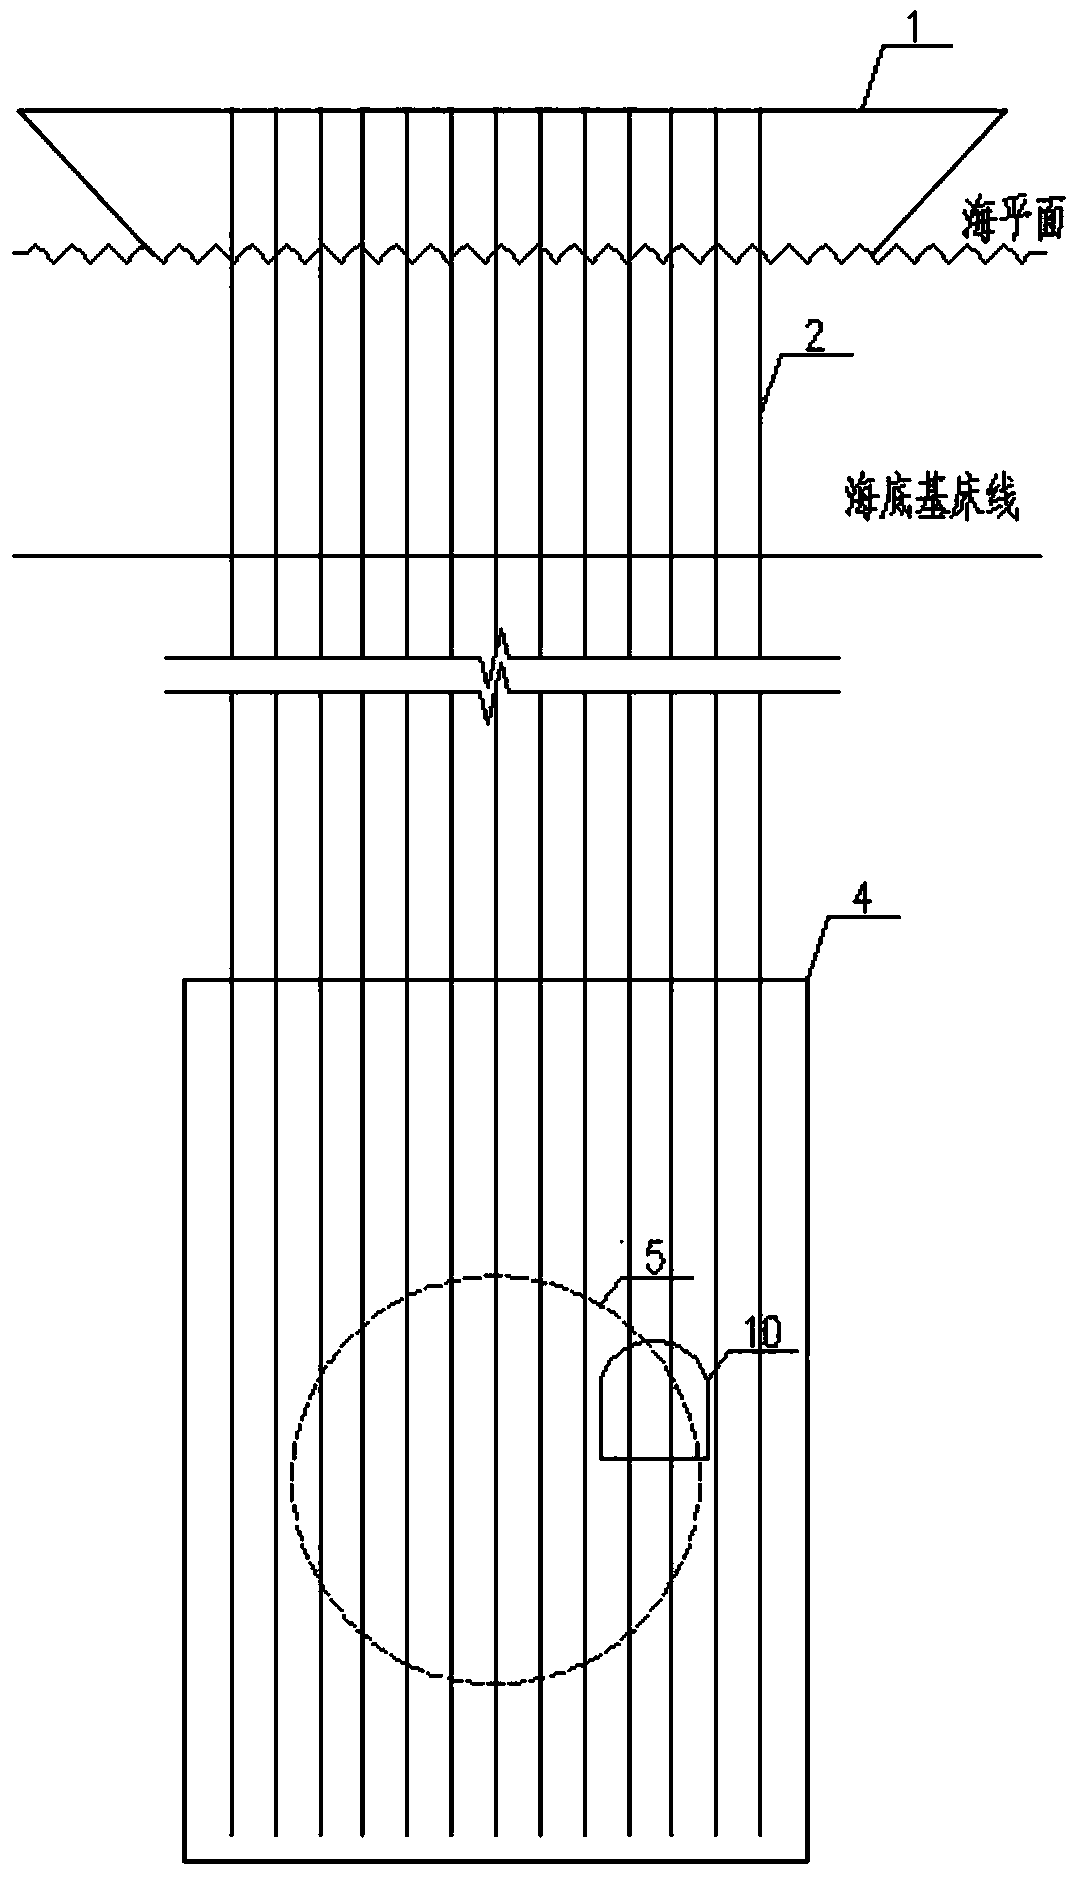 Sea area high-water-pressure shield method tunnel emergency tool change structure and construction method